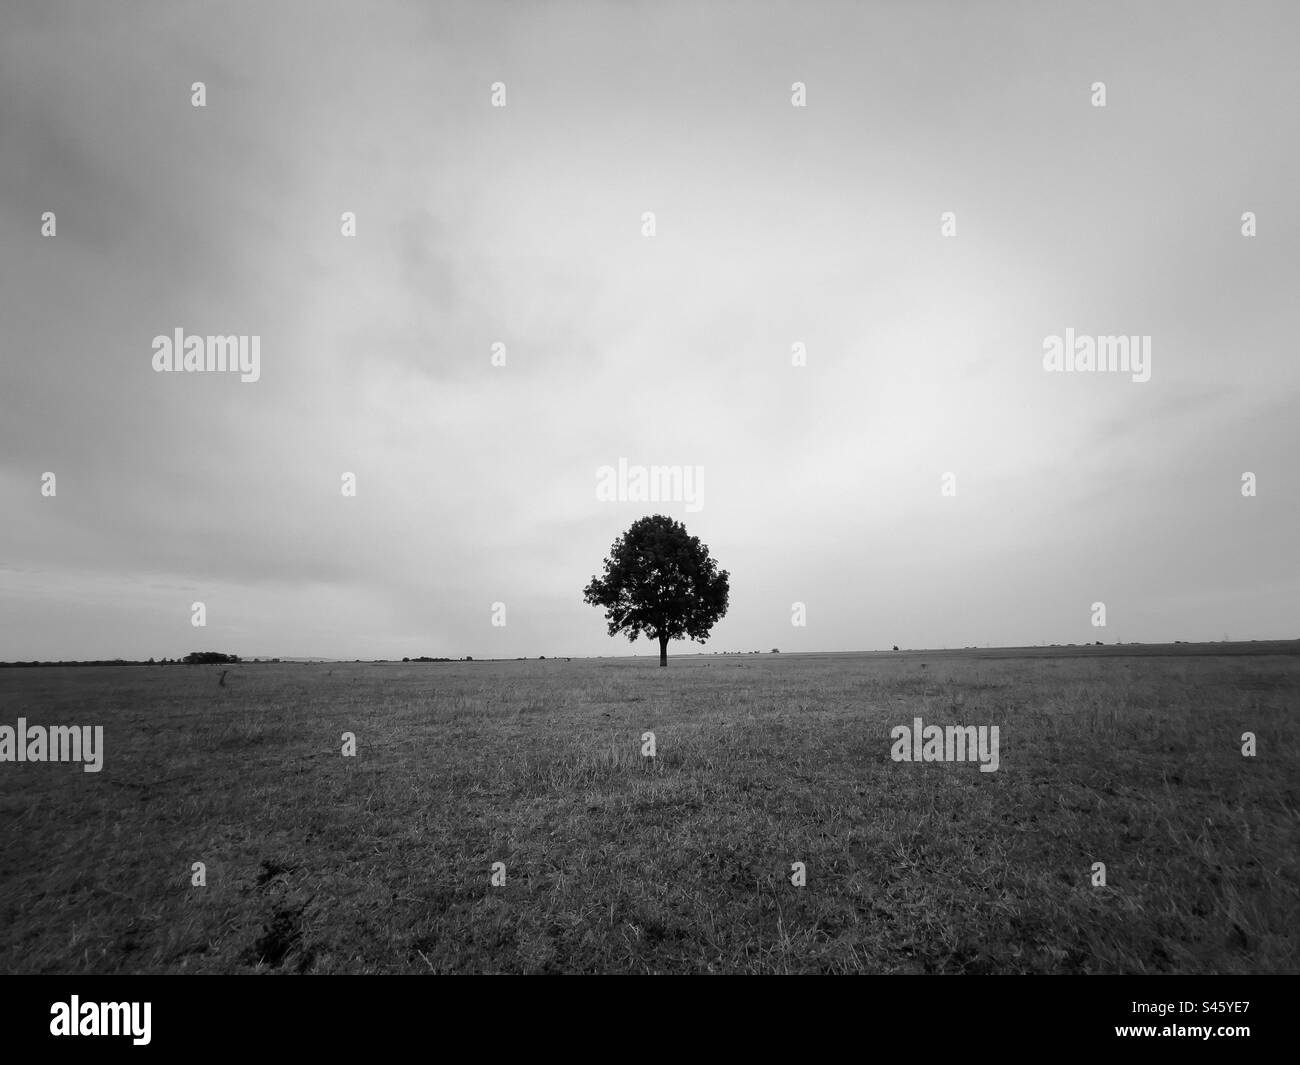 Lonely tree in the middle of a field on a cloudy day Stock Photo